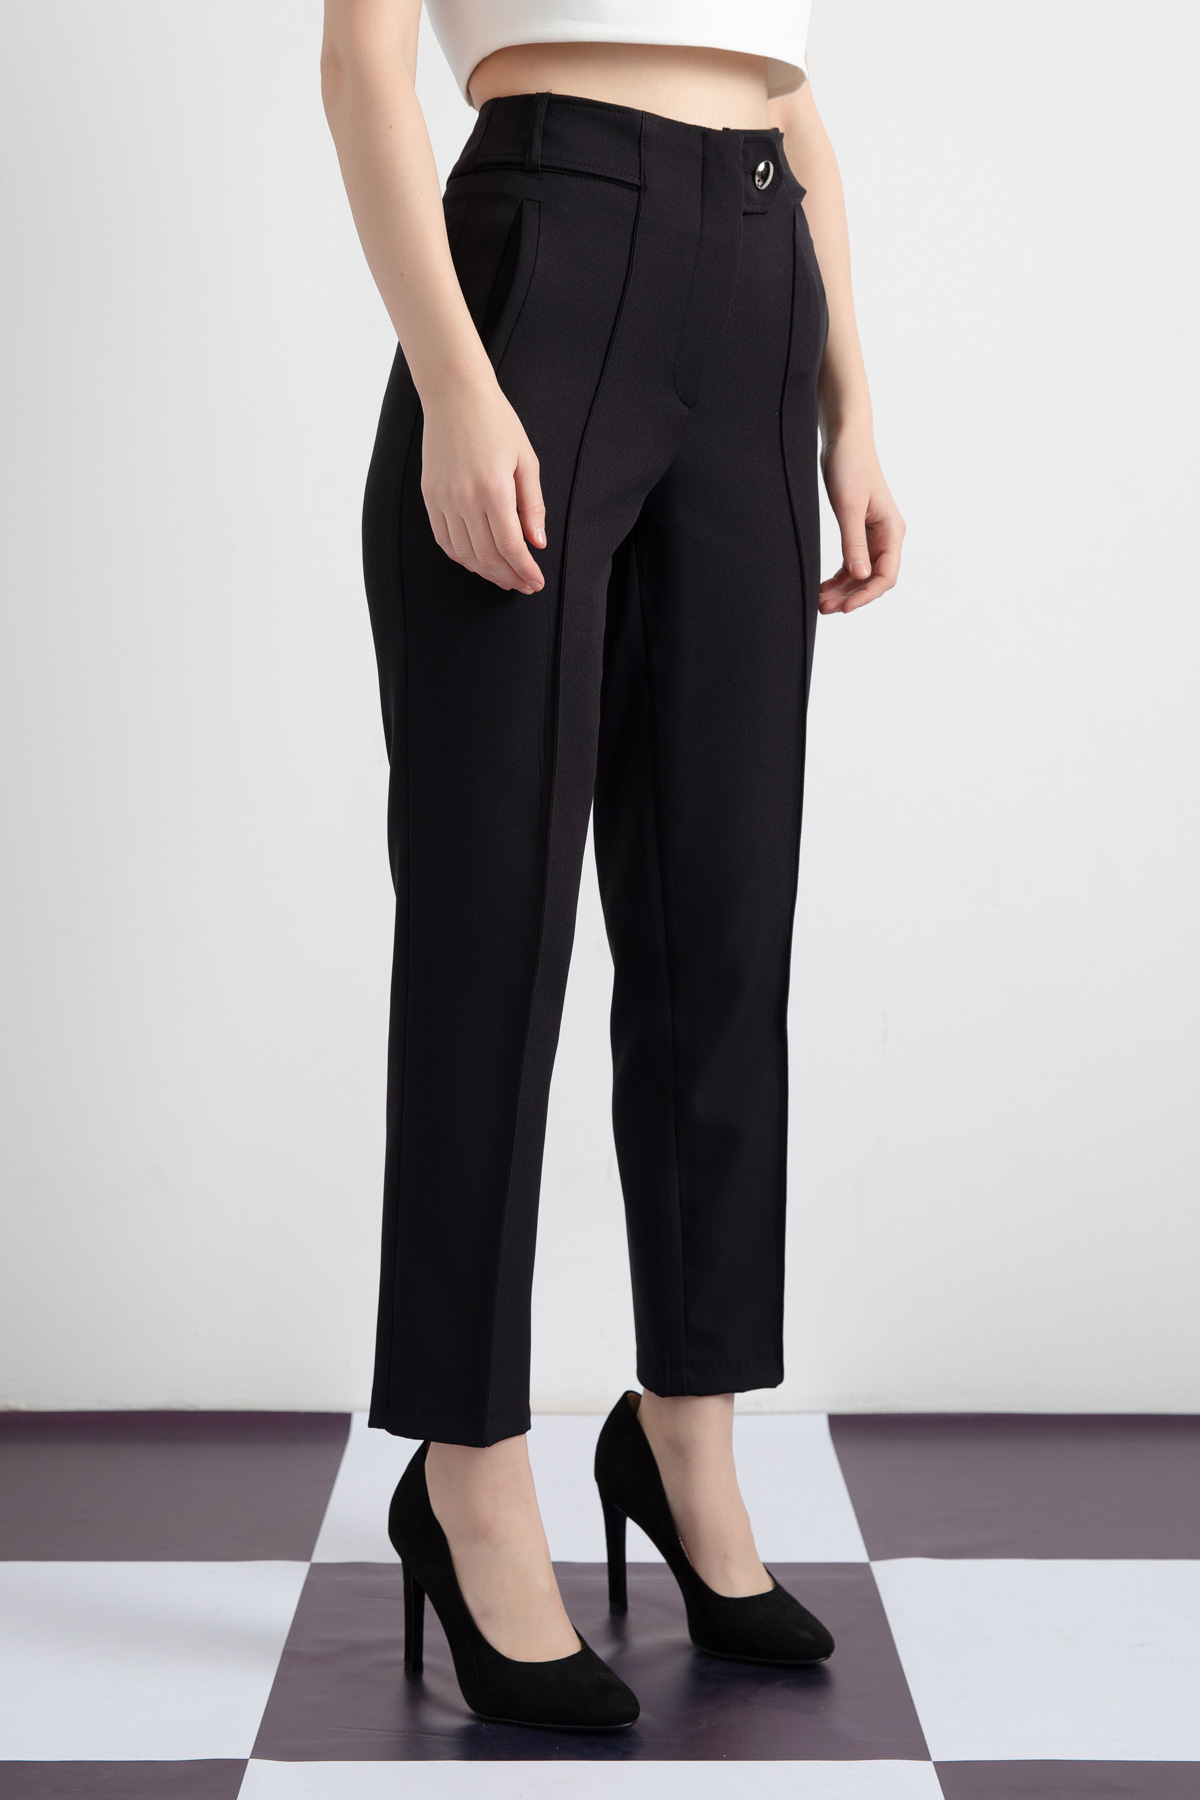 Women's Black Button Detailed Trousers